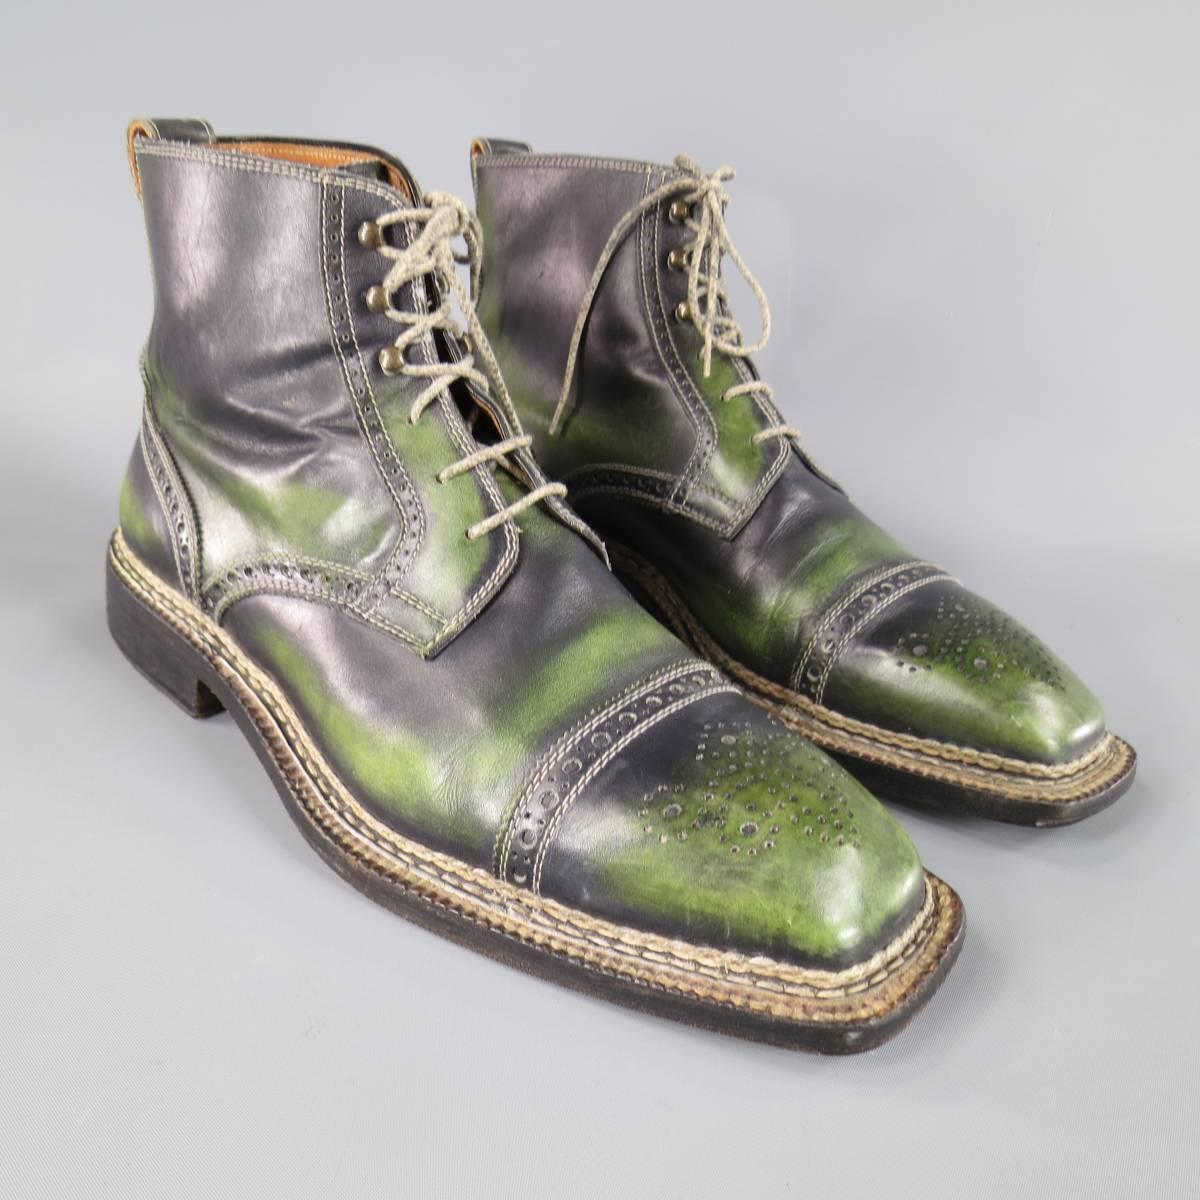 These unique BETTANIN & VENTURI dress boots come in a custom distressed and dyed black & green leather and feature a square toe with toe cap, contrast stitching, and perforated brogue details throughout. Made in Italy.
 
Excellent Pre-Owned